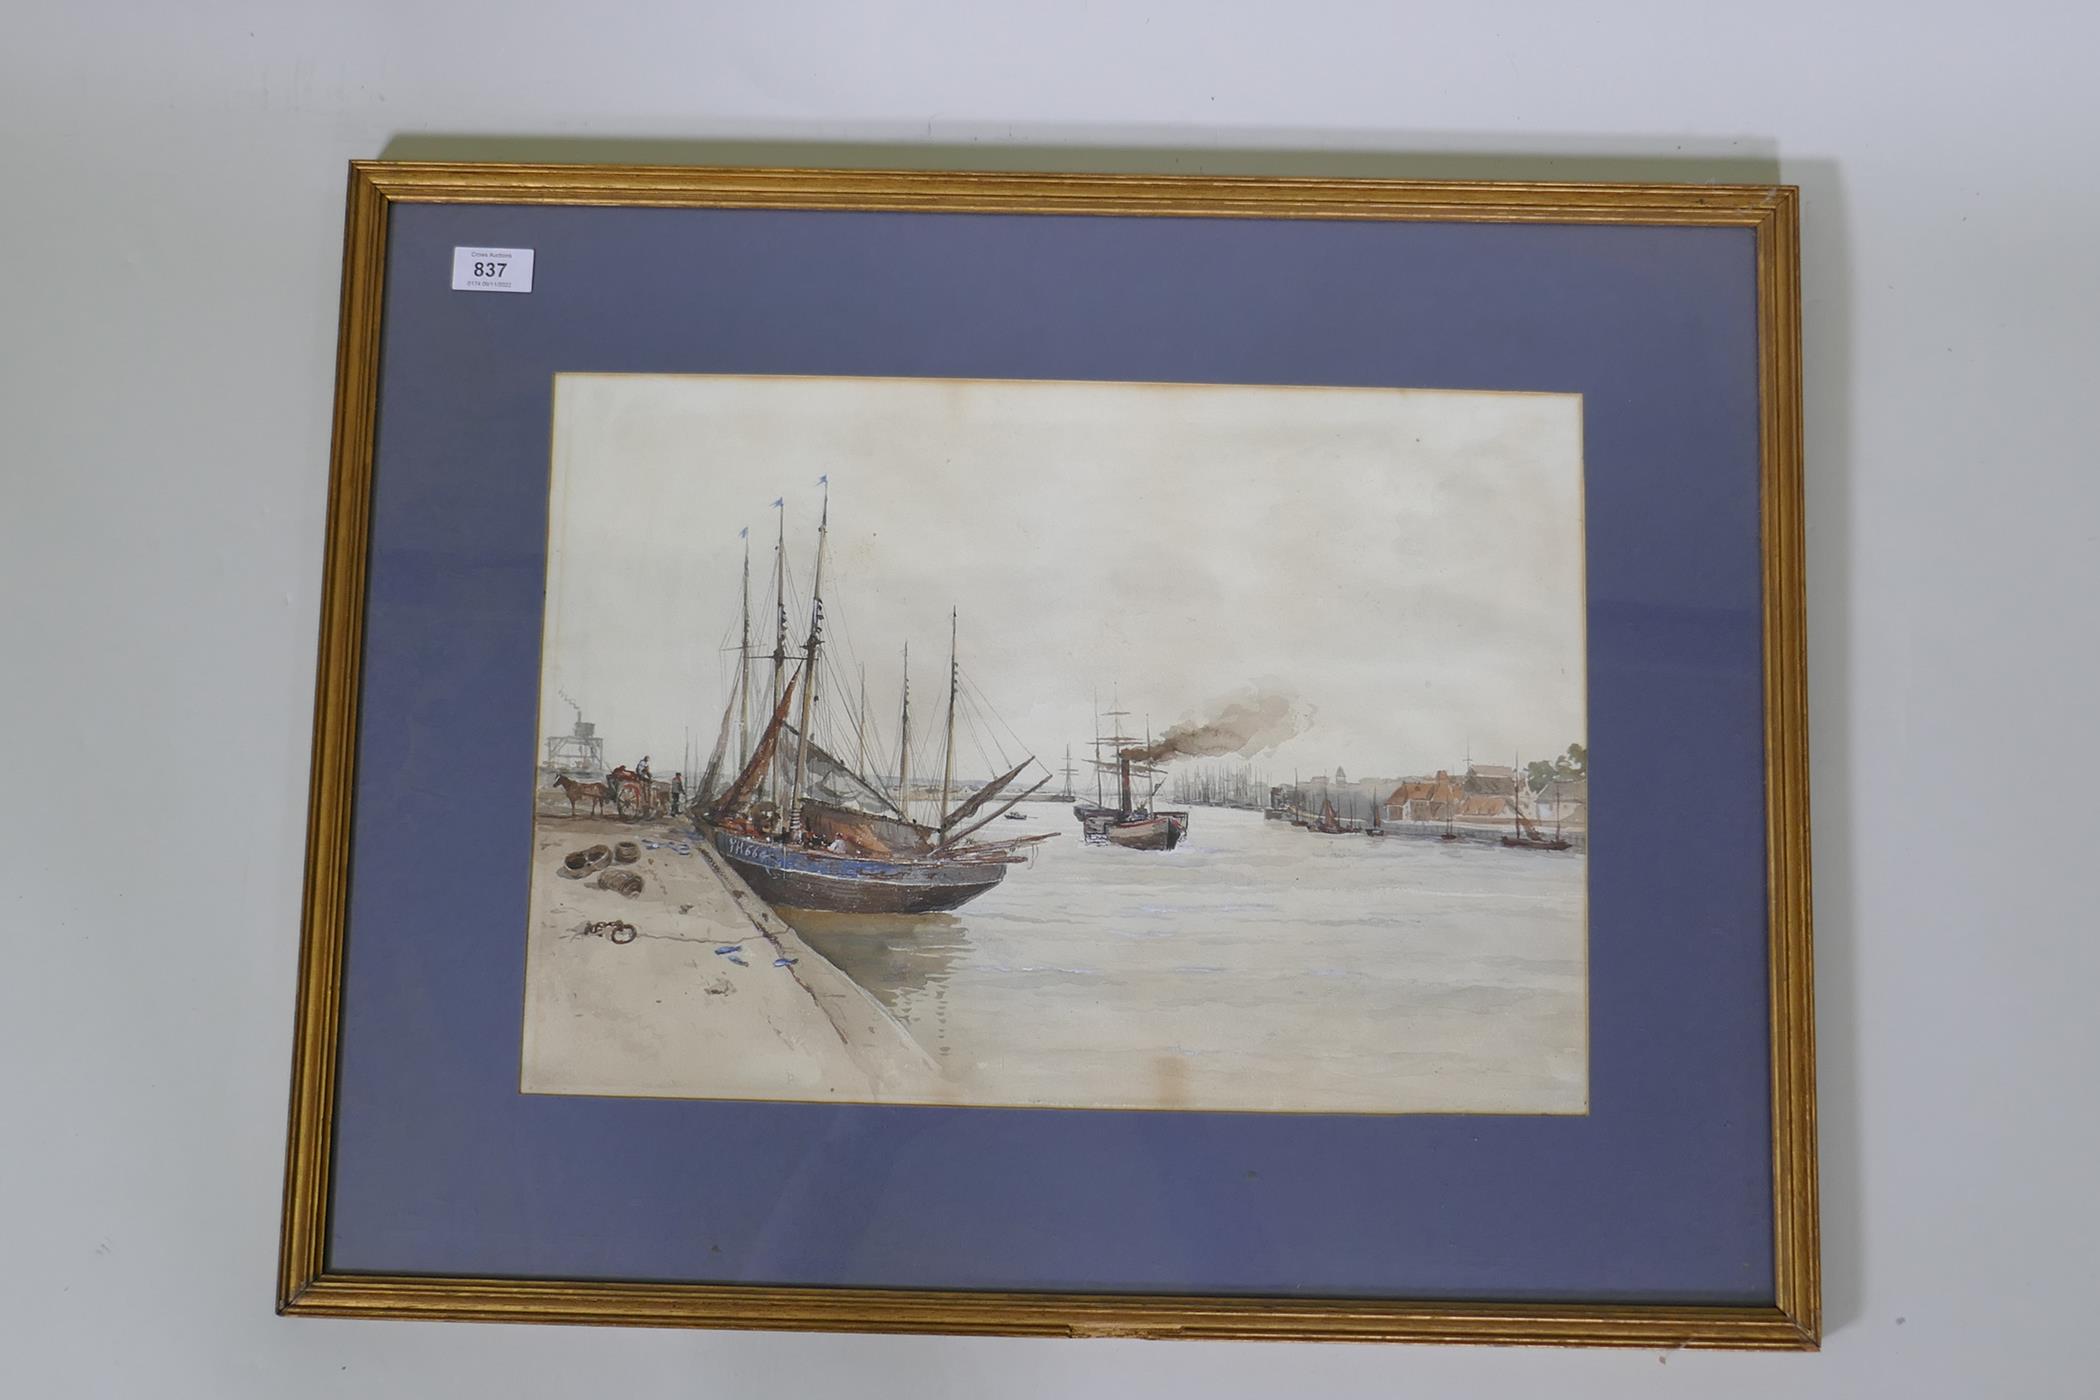 Yarmouth quayside with barges and paddle steamer, watercolour, unsigned, 49 x 34cm - Image 2 of 2